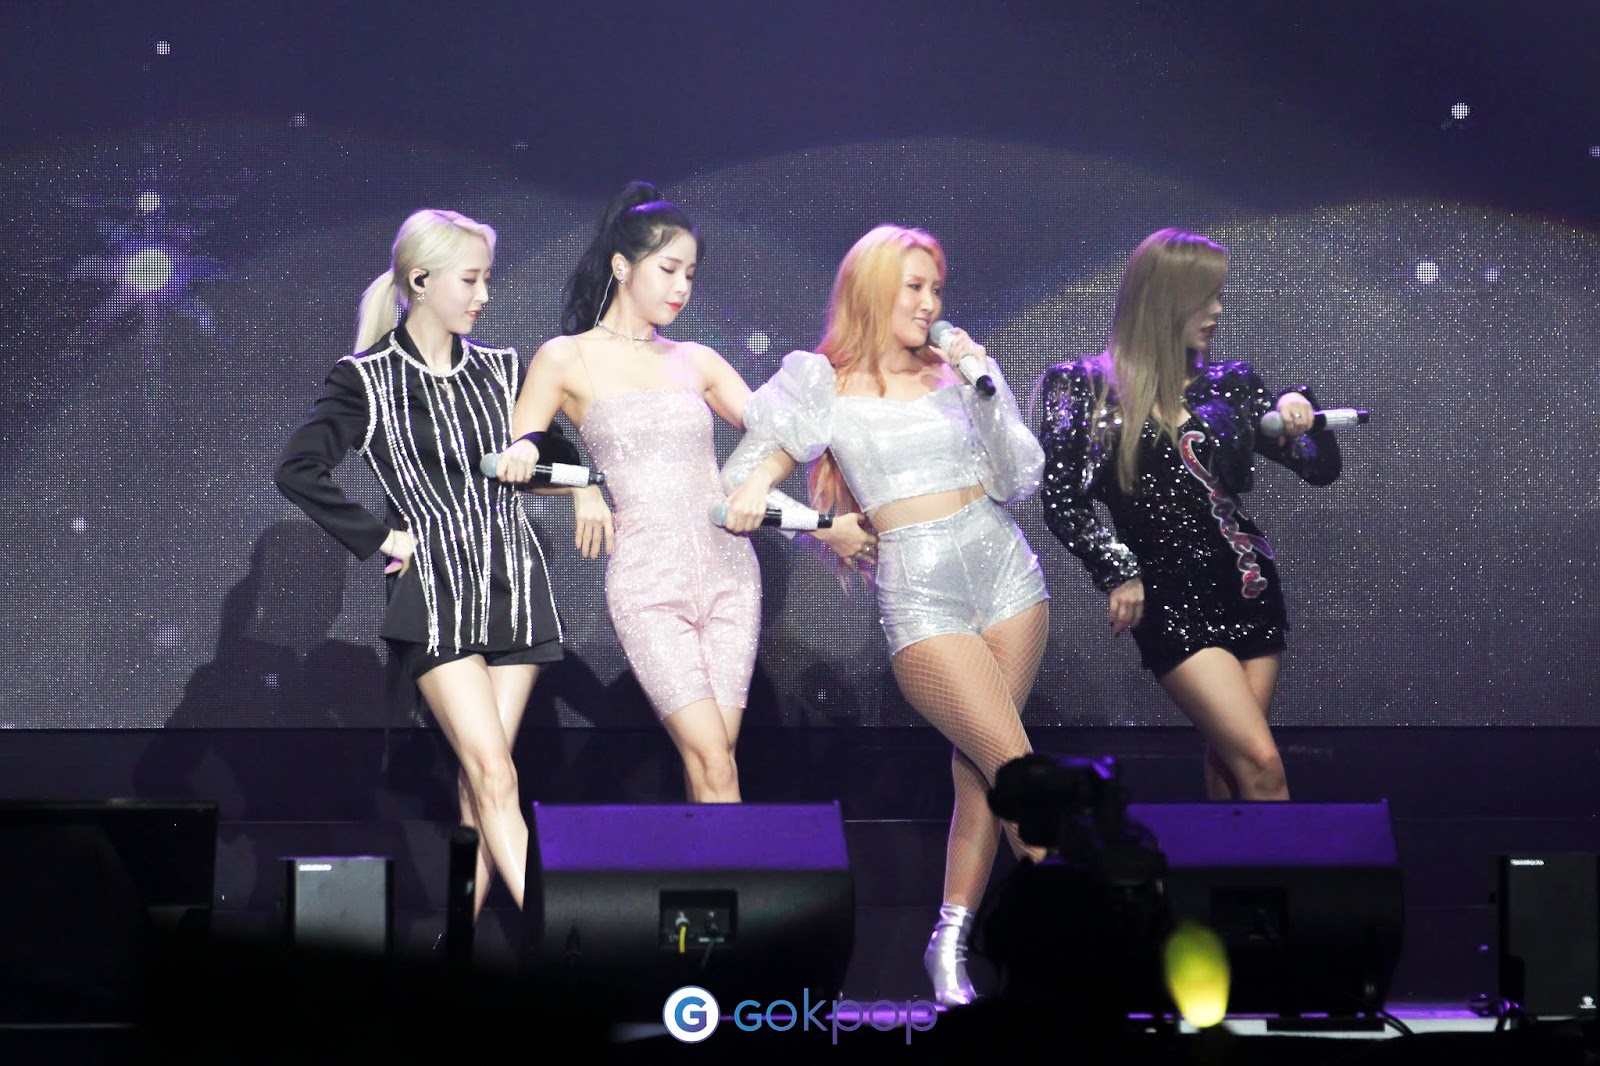 MAMAMOO concludes their Asia Fan Meeting Tour [HELLO! MOOMOO] in Singapore